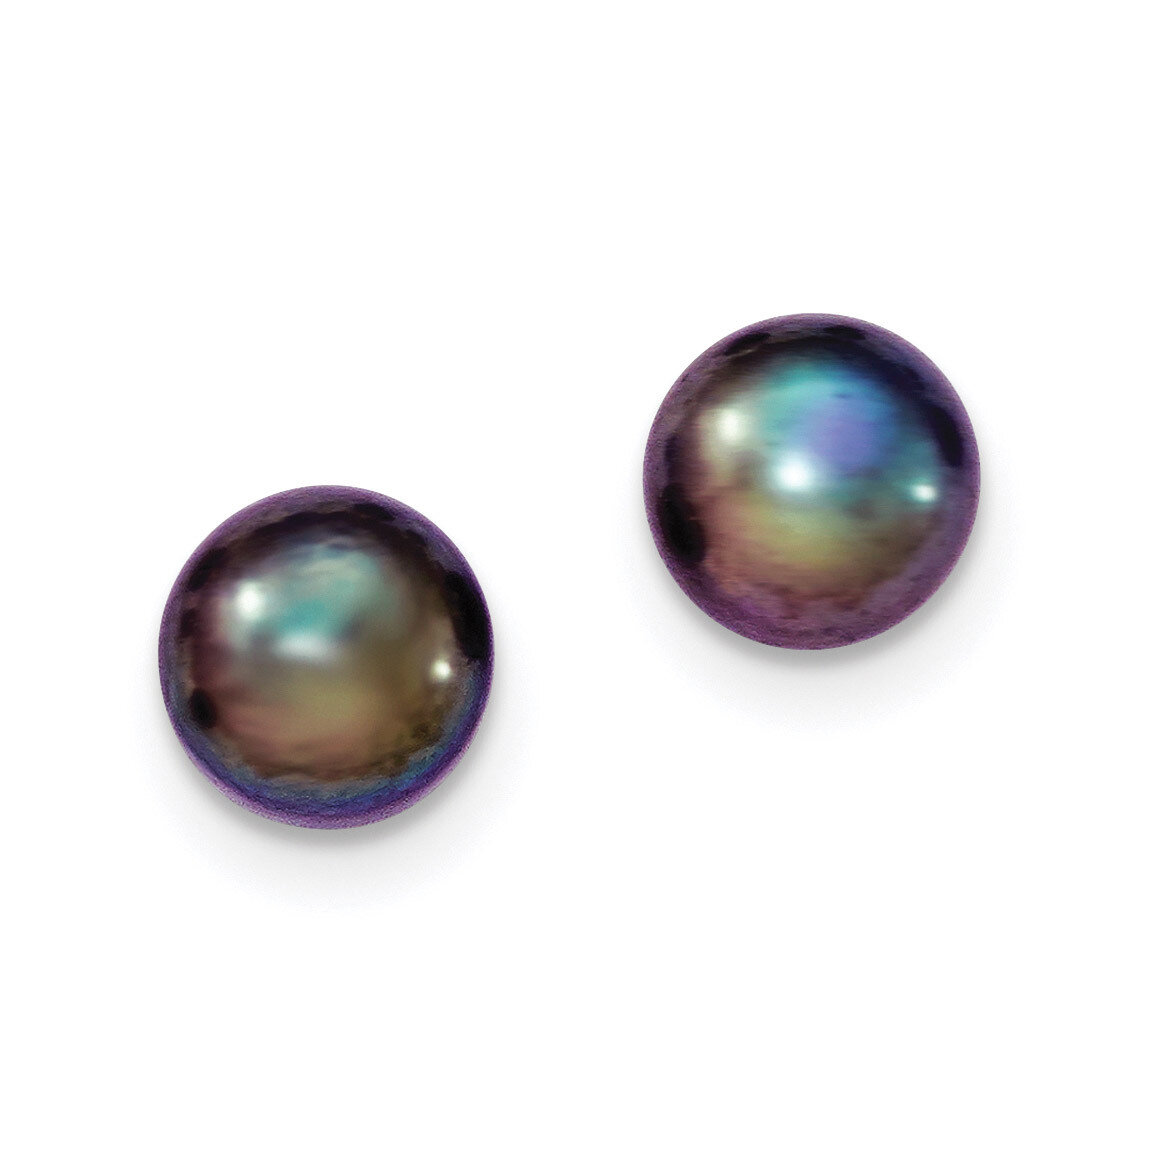 9-10mm Black Freshwater Cultured Button Pearl Stud Earrings Sterling Silver QE12669